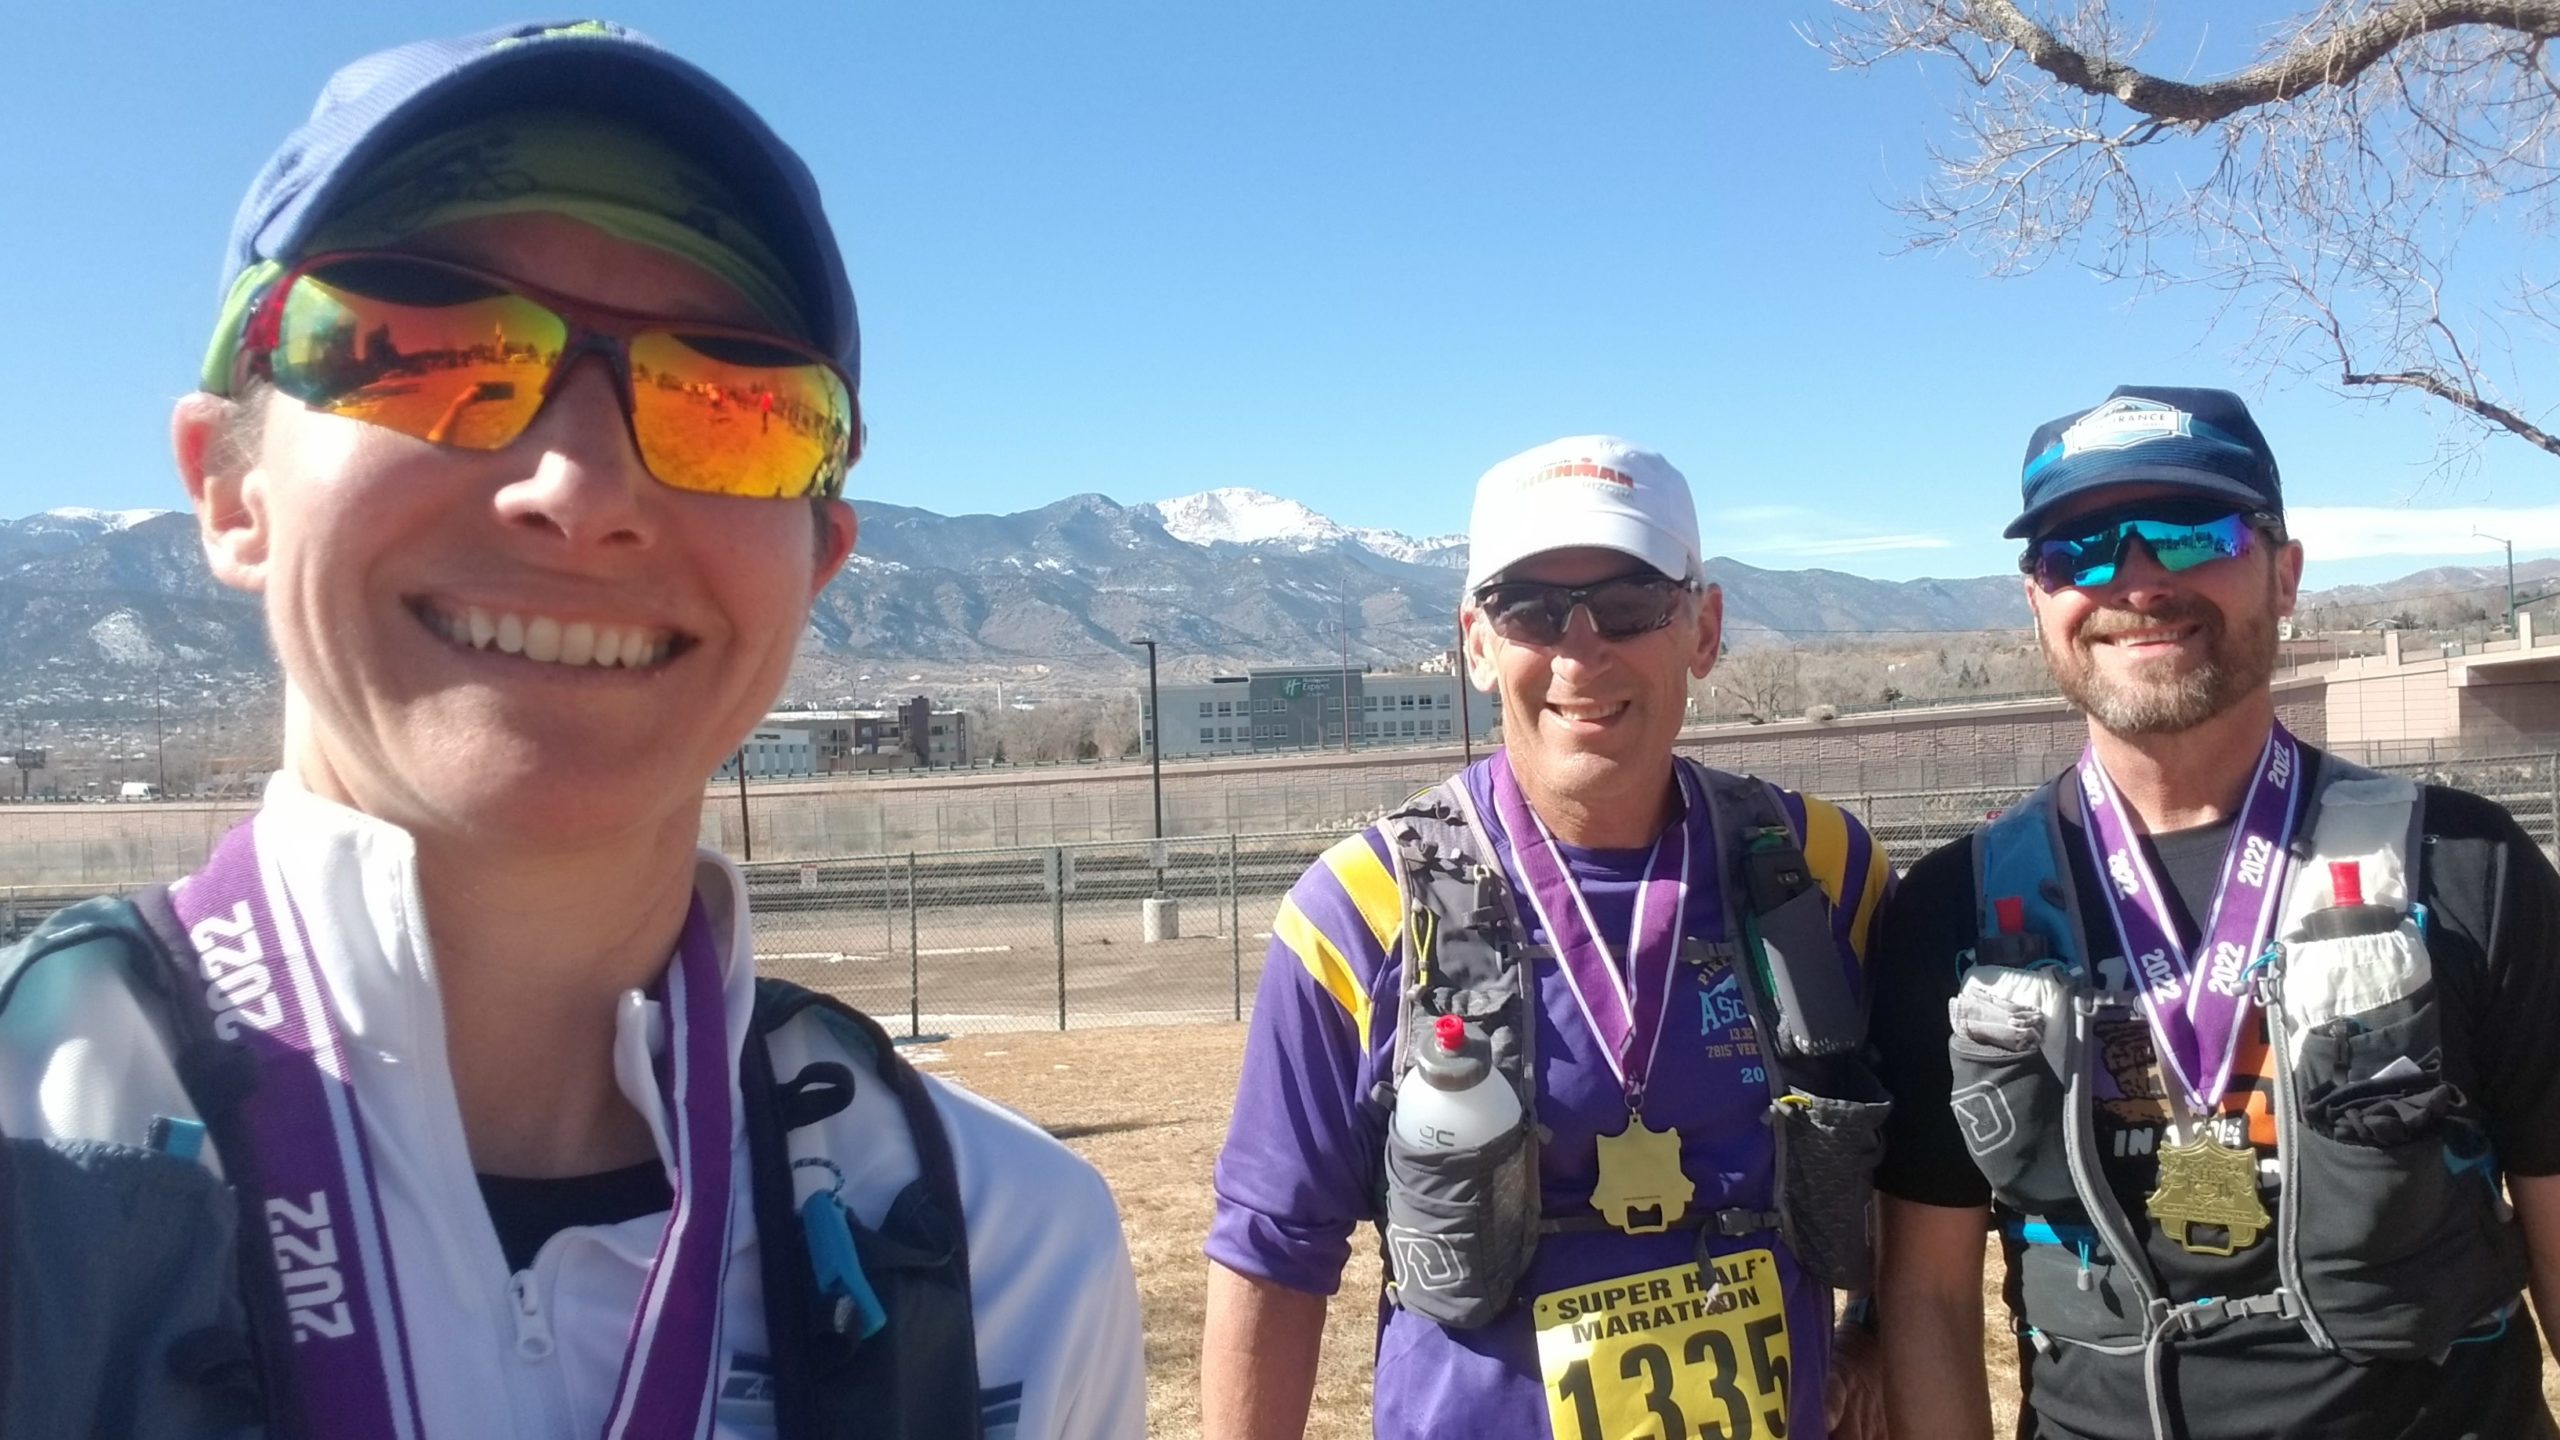 selfie of three runners after a race, one woman on the left (photo taker) and two men on the right. All are wearing baseball hats, sunglasses, and race medals. A snow-capped mountain is in the background far off in the distance.